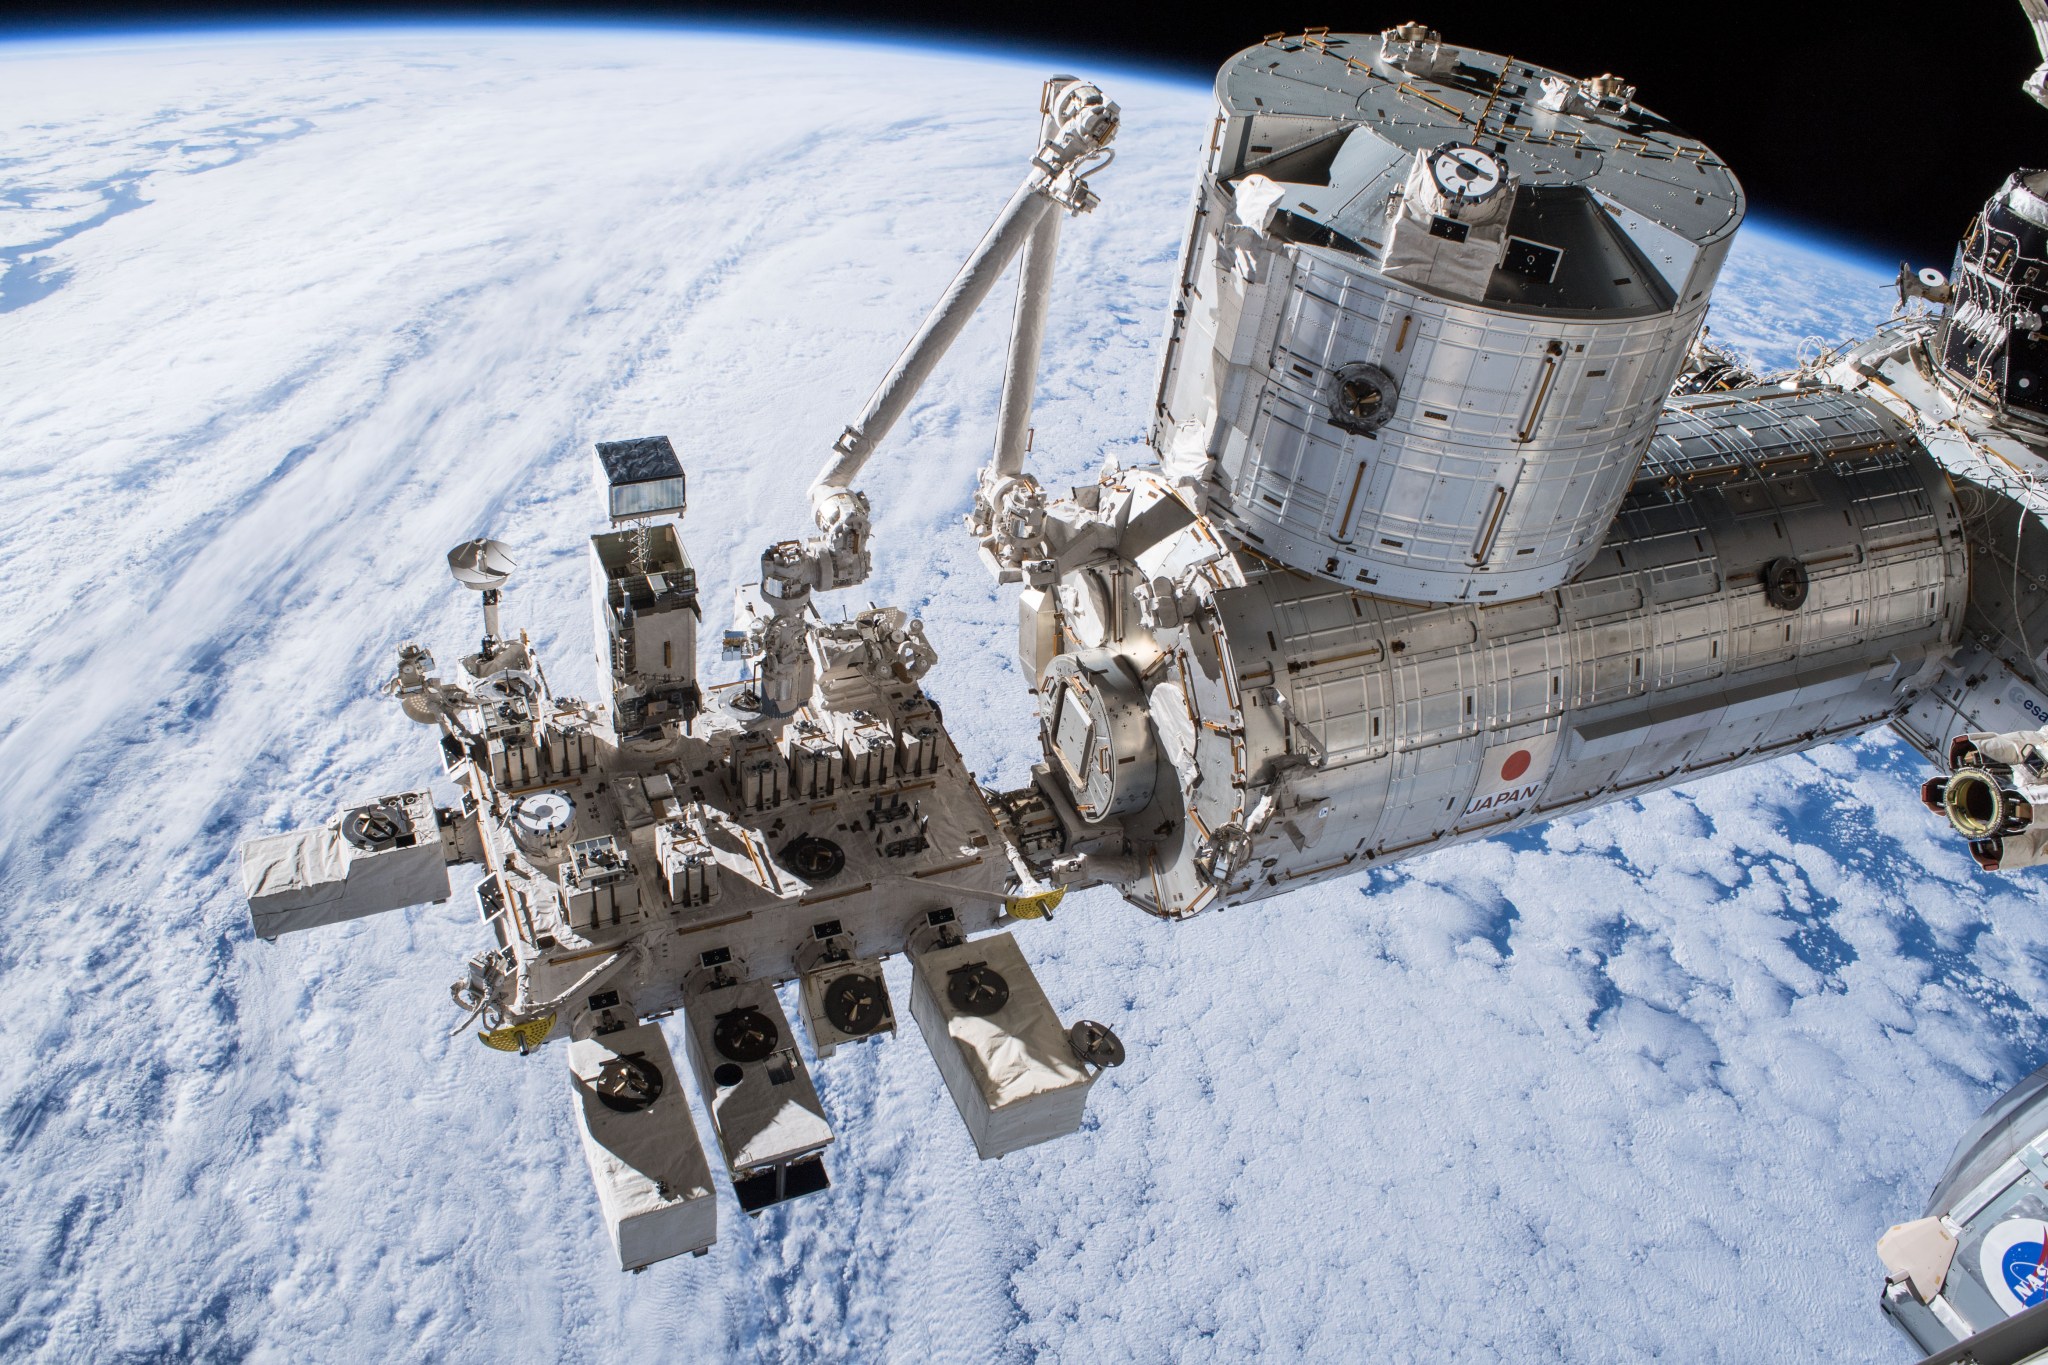 The Japanese Kibo laboratory module with its Exposed Facility, Pressurized Module, Logistics Module, and robotic arm is pictured as the International Space Station orbited over the southern Pacific Ocean.